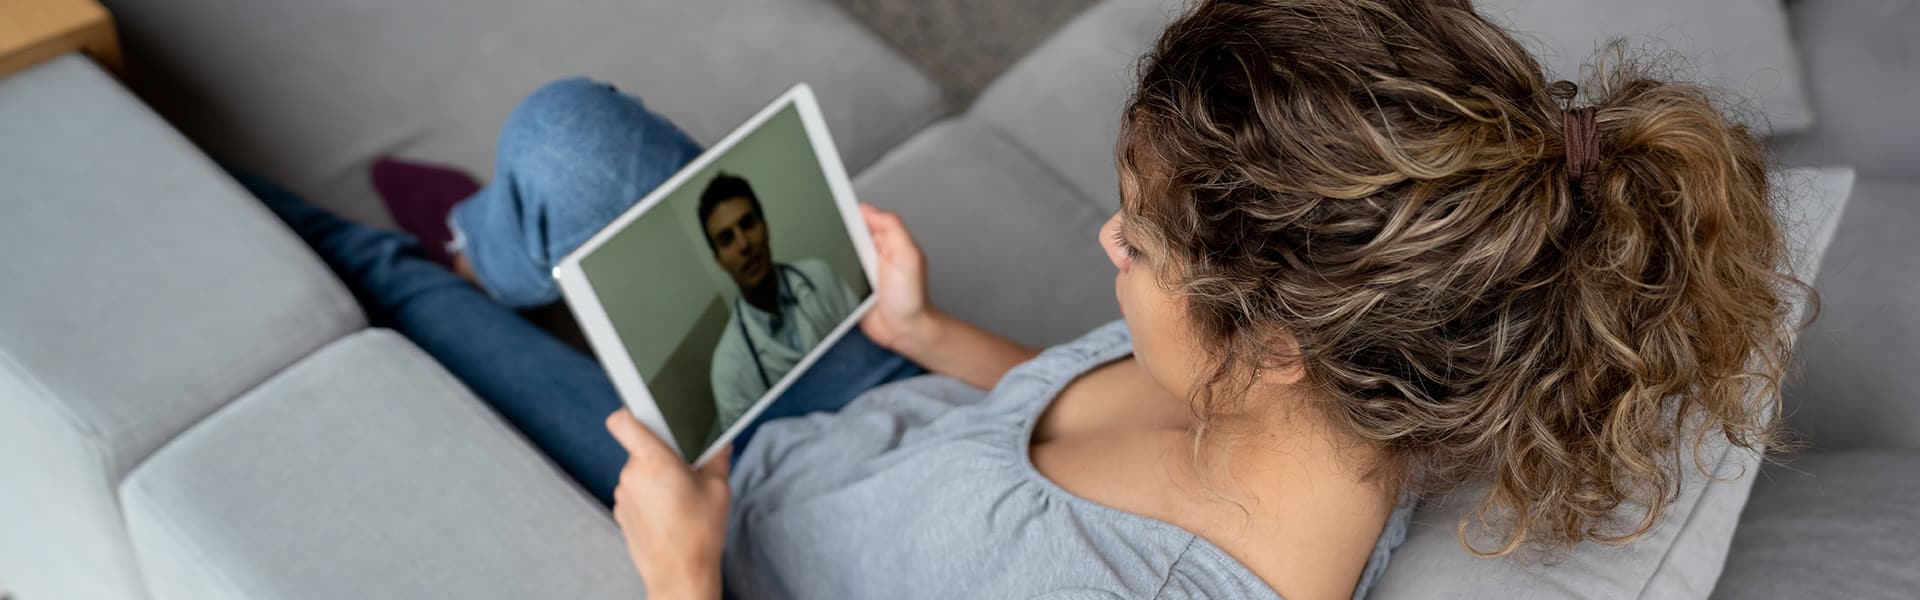 Is Telehealth the Solution? Reimagining Community Health Systems